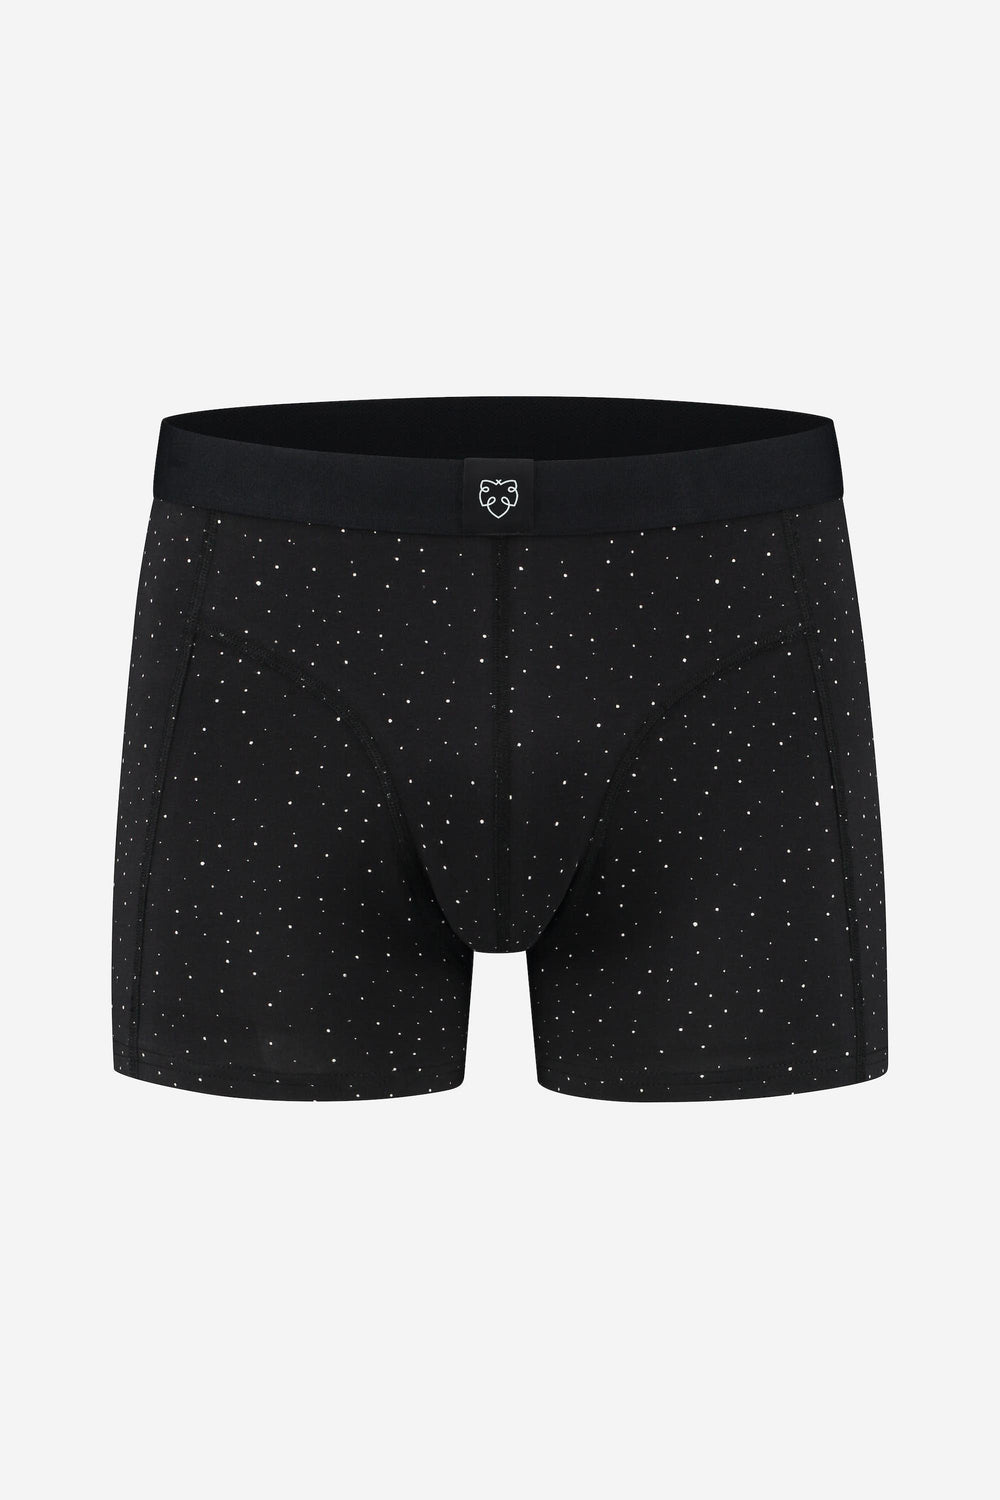 OUTER SPACE Pirate Black Briefs